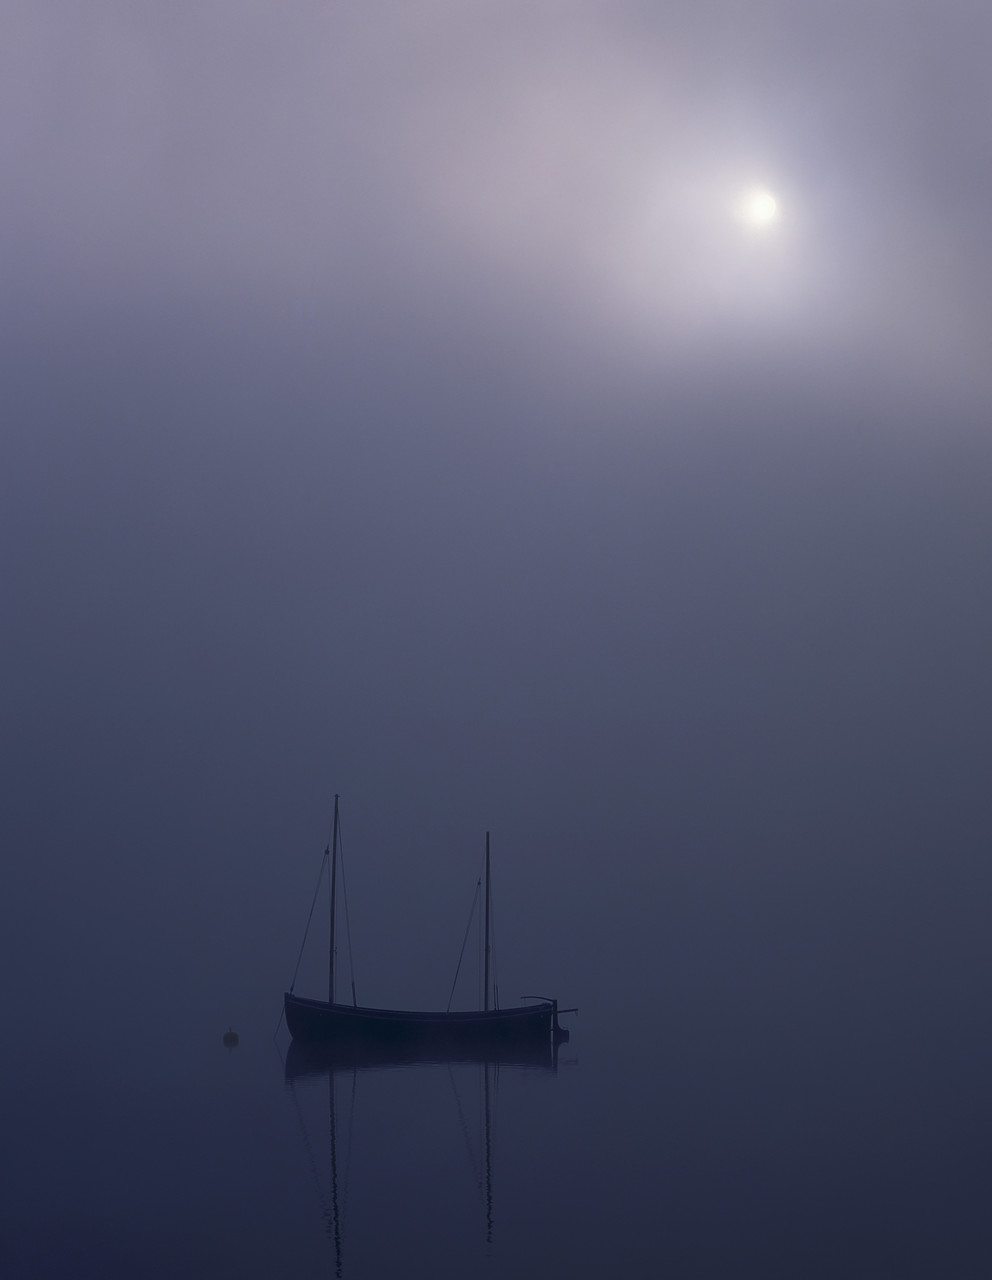 #923907-3 - Sailboat in Mist, Ullswater, Lake District National Park, Cumbria, England